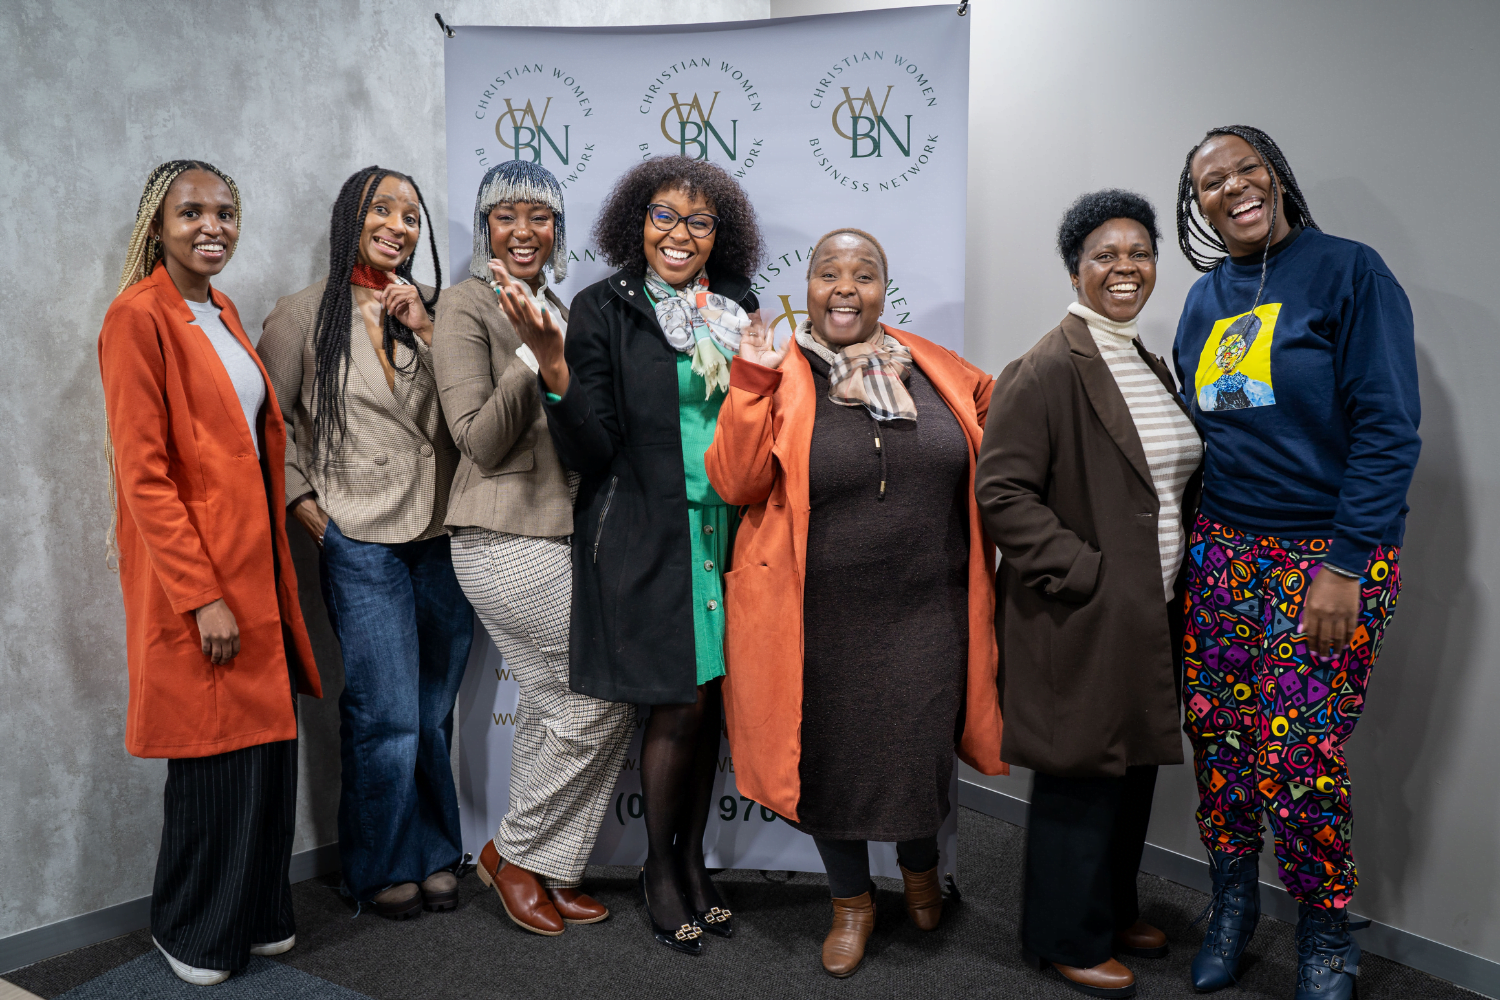 Kea Modise-Moloto, Founder of Arise in Johannesburg, South Africa, poses with women in her business network.